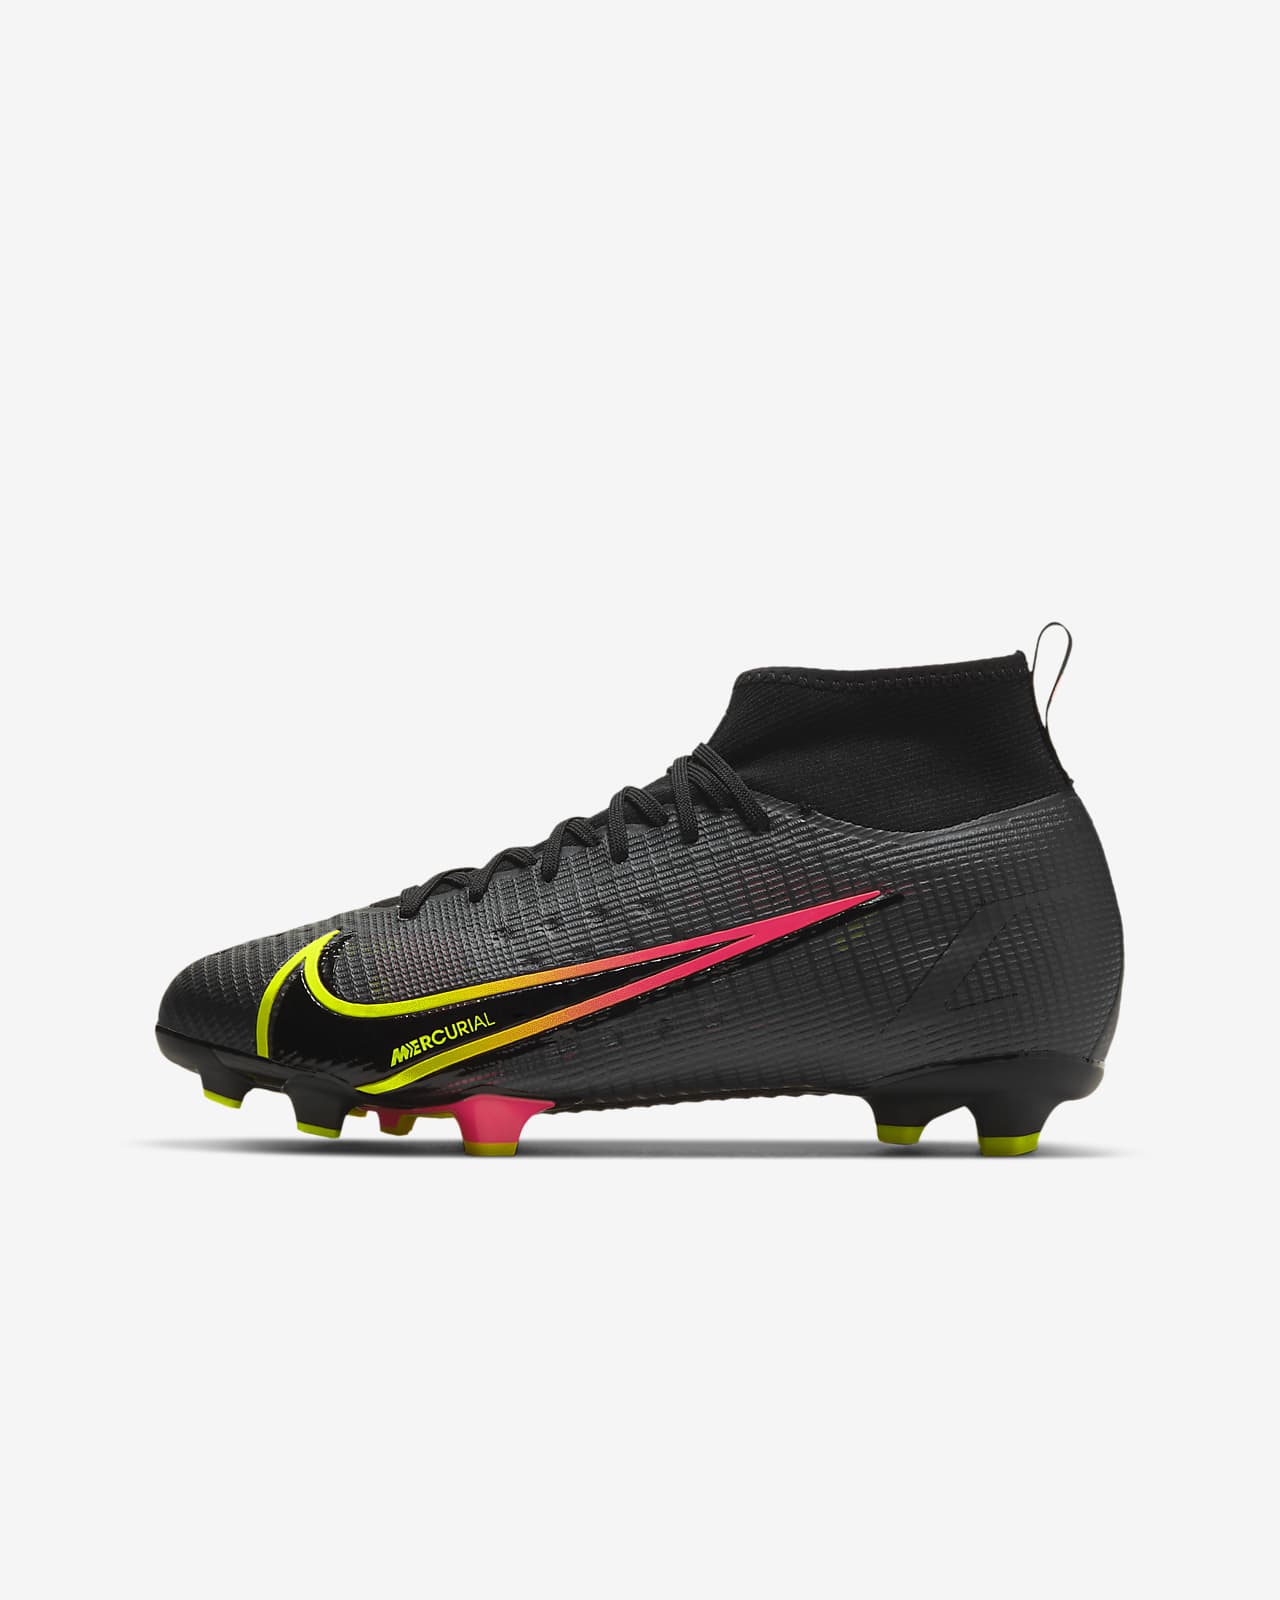 cool nike soccer shoes